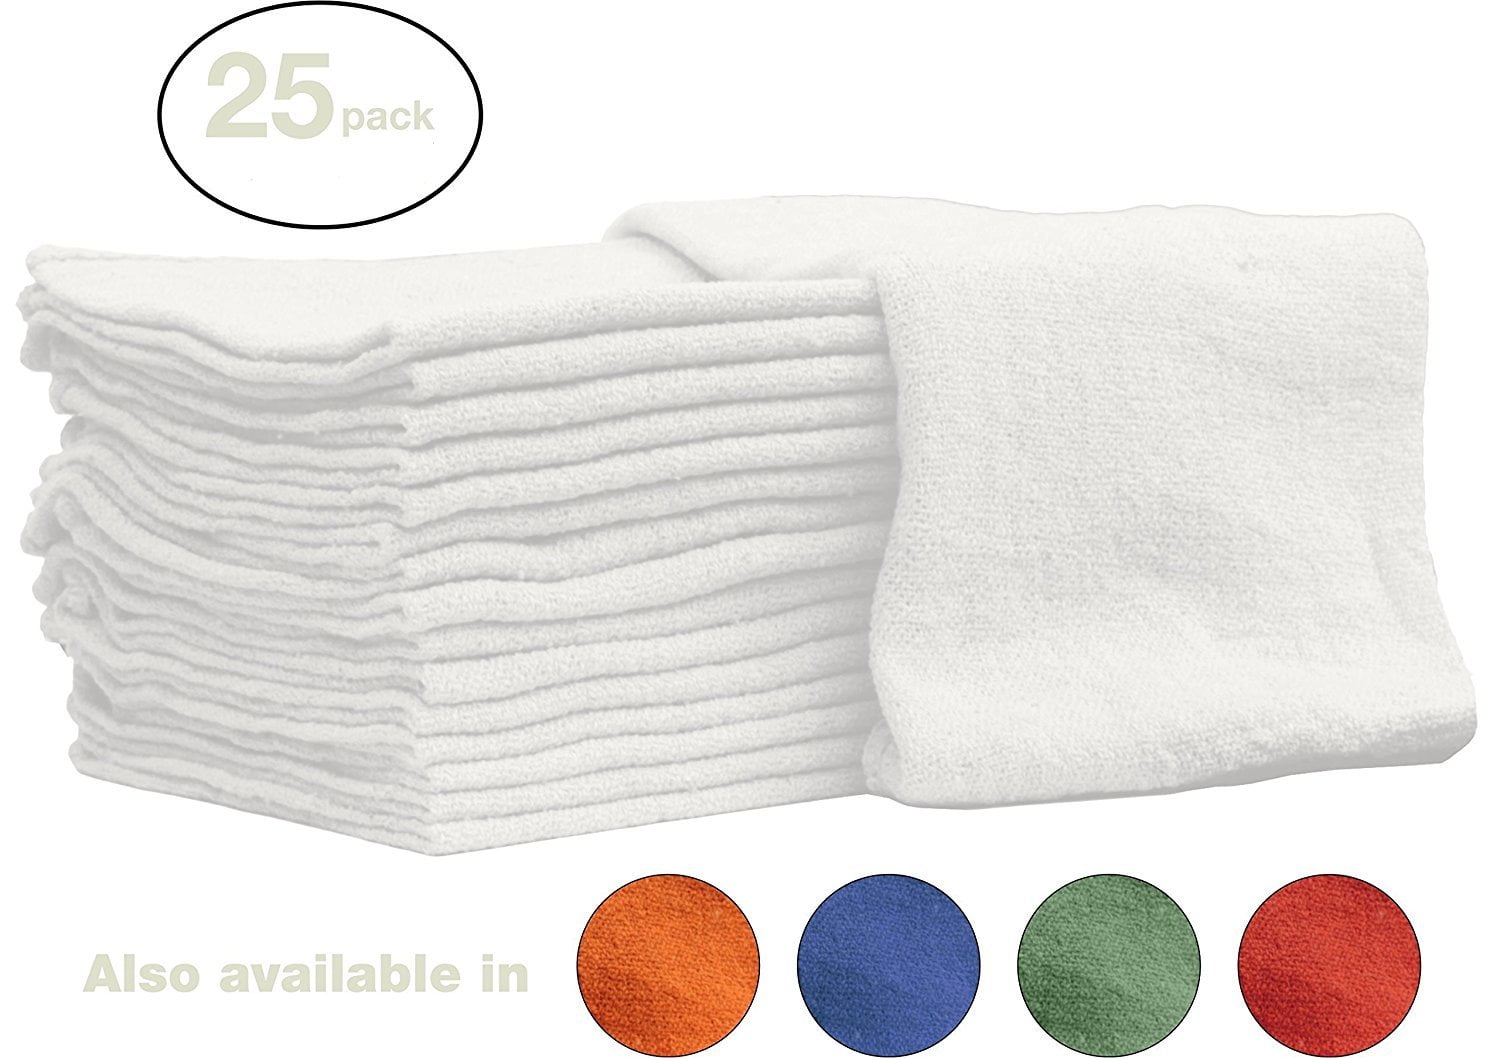 114 ($1.35#) TERRY TOWEL WIPING COTTON CLEANING RAGS OKLAHOMA